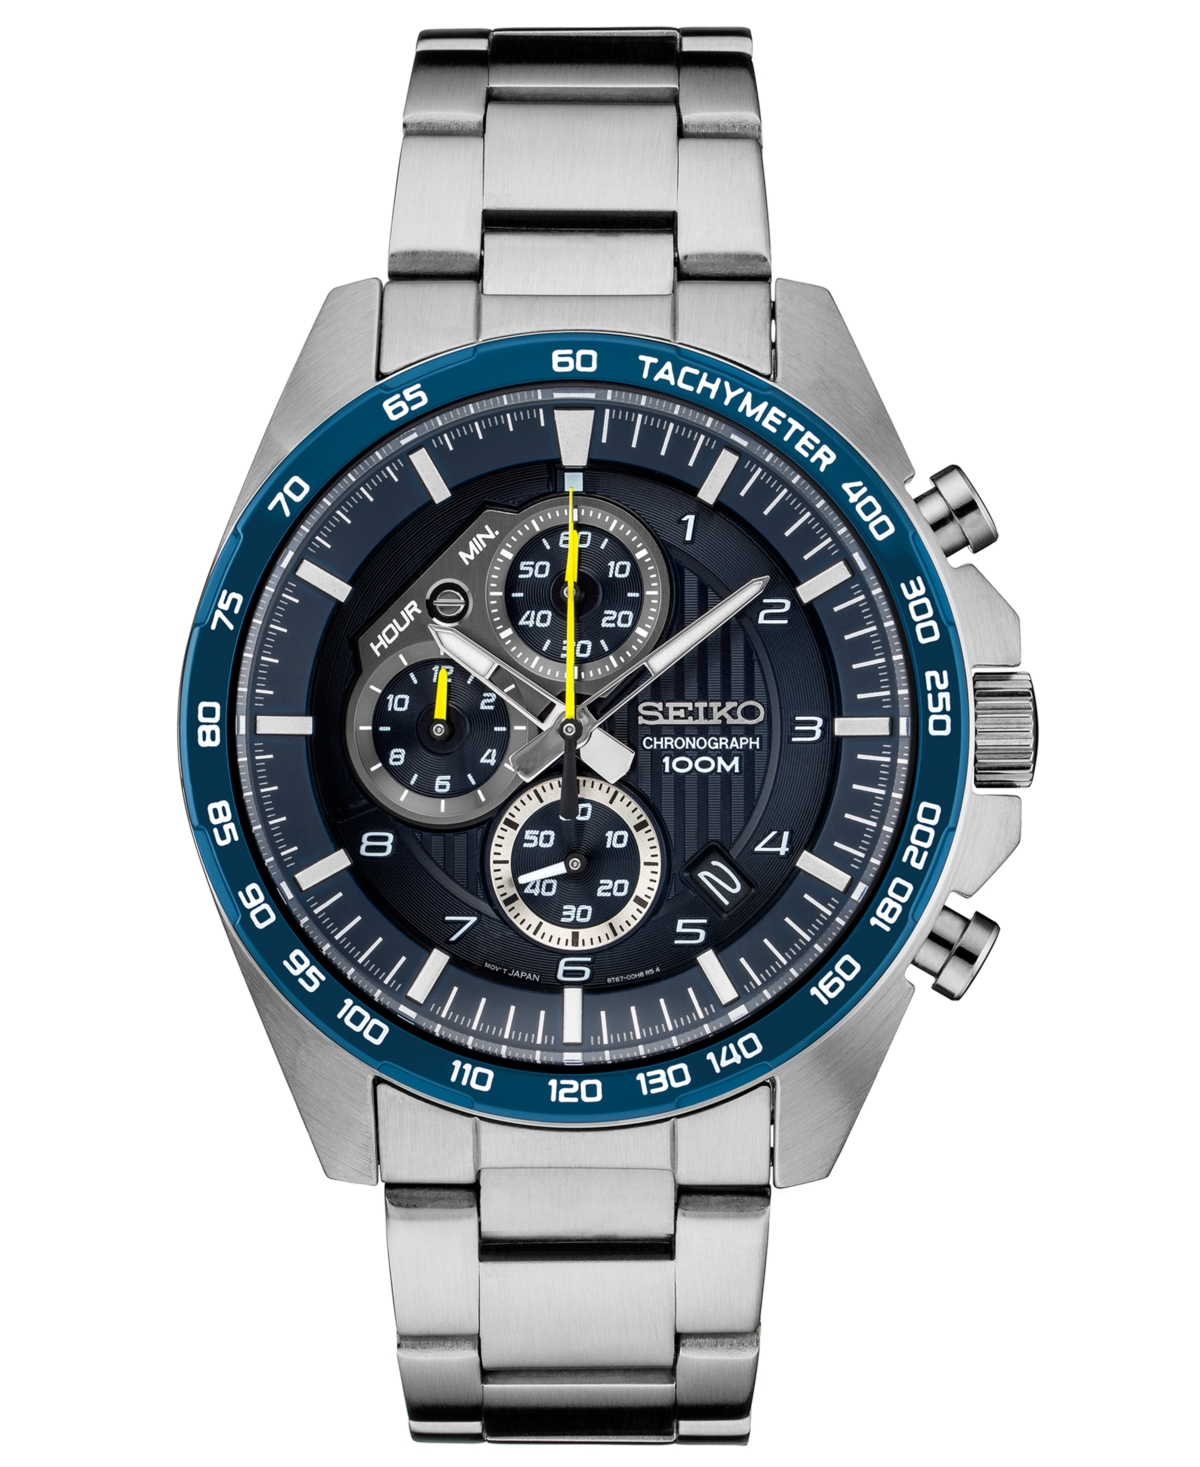 Seiko Men's Chronograph Stainless Steel Bracelet Watch  & Reviews -  All Watches - Jewelry & Watches - Macy's